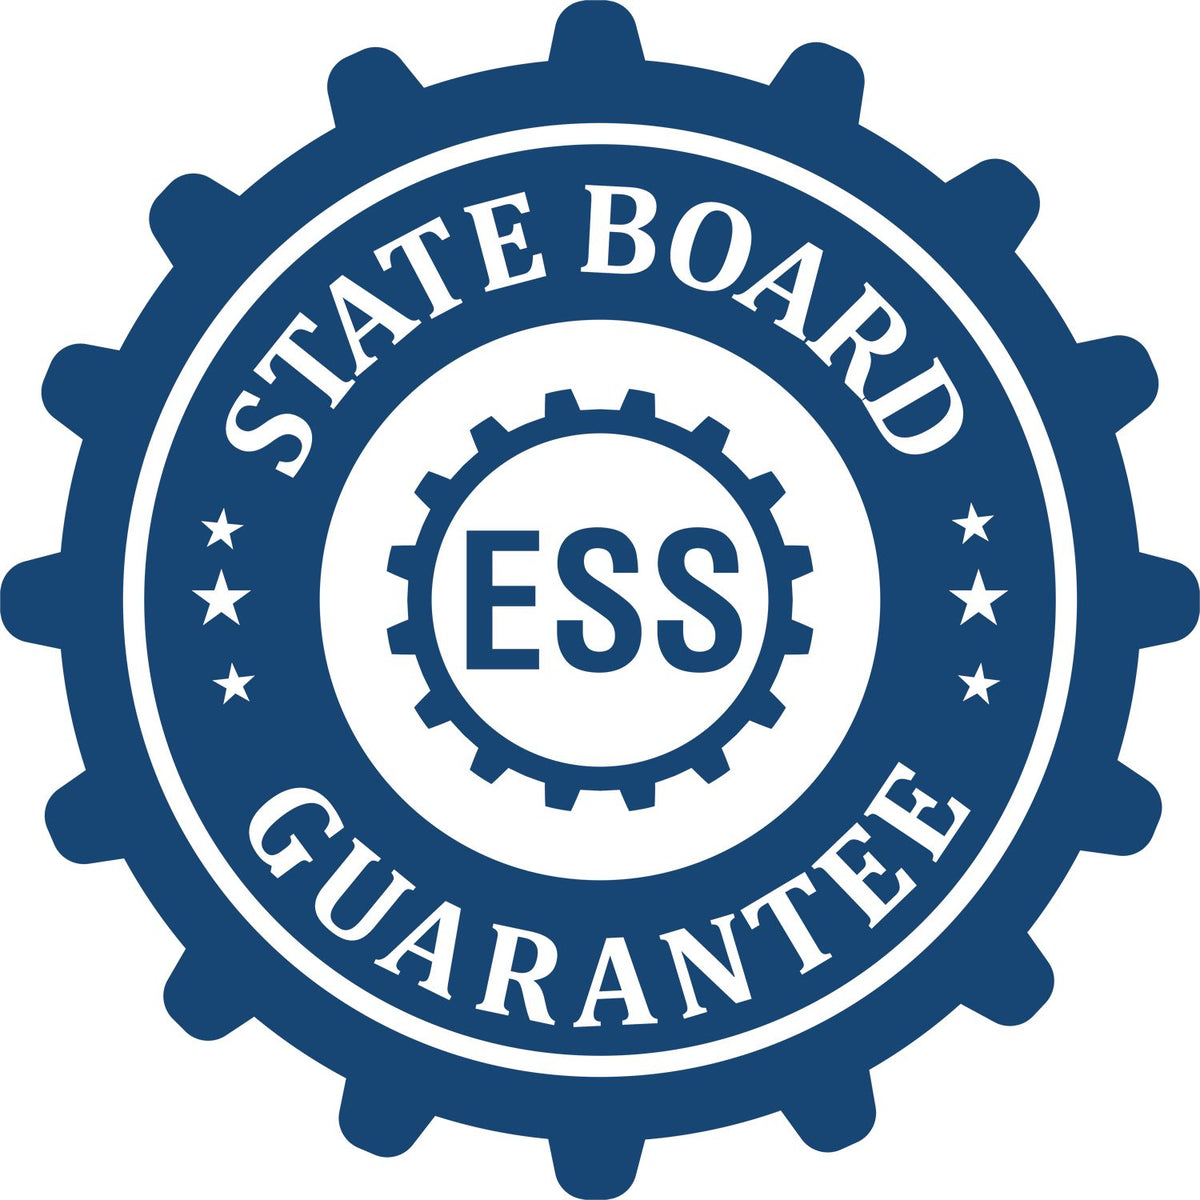 An emblem in a gear shape illustrating a state board guarantee for the Slim Pre-Inked Montana Land Surveyor Seal Stamp product.